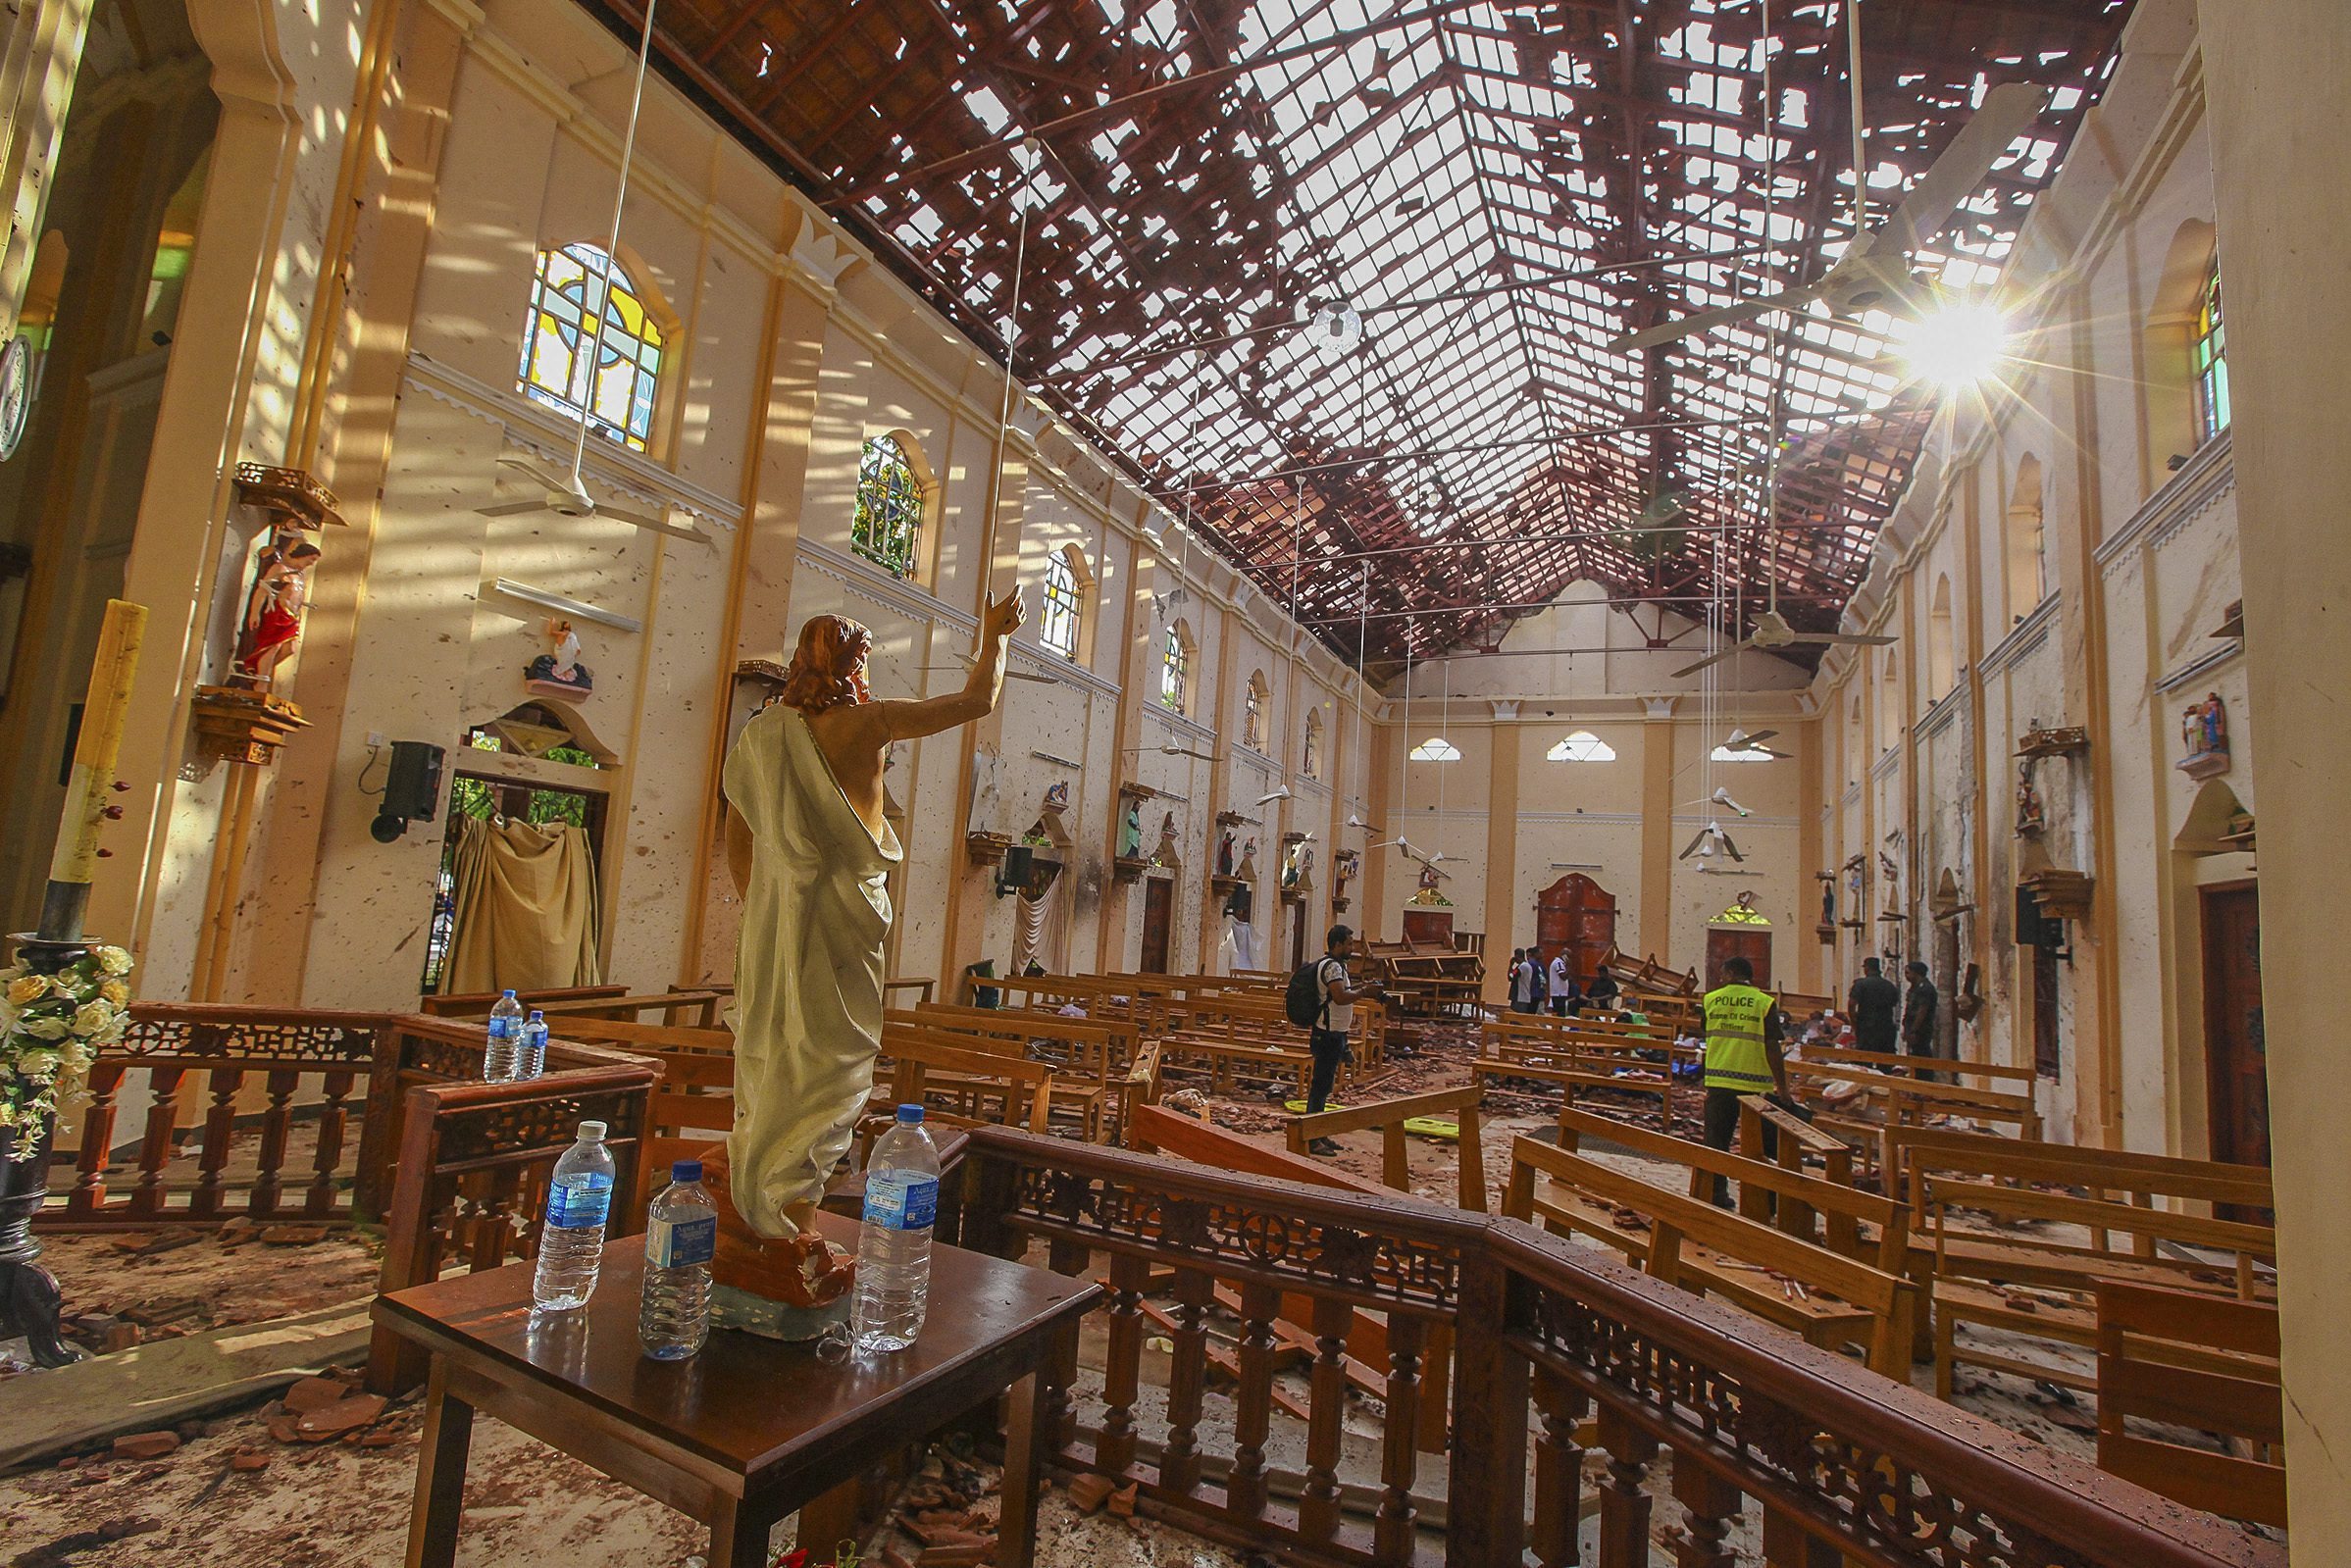 Refugees, asylum seekers harassed in Sri Lanka after Easter Sunday blasts